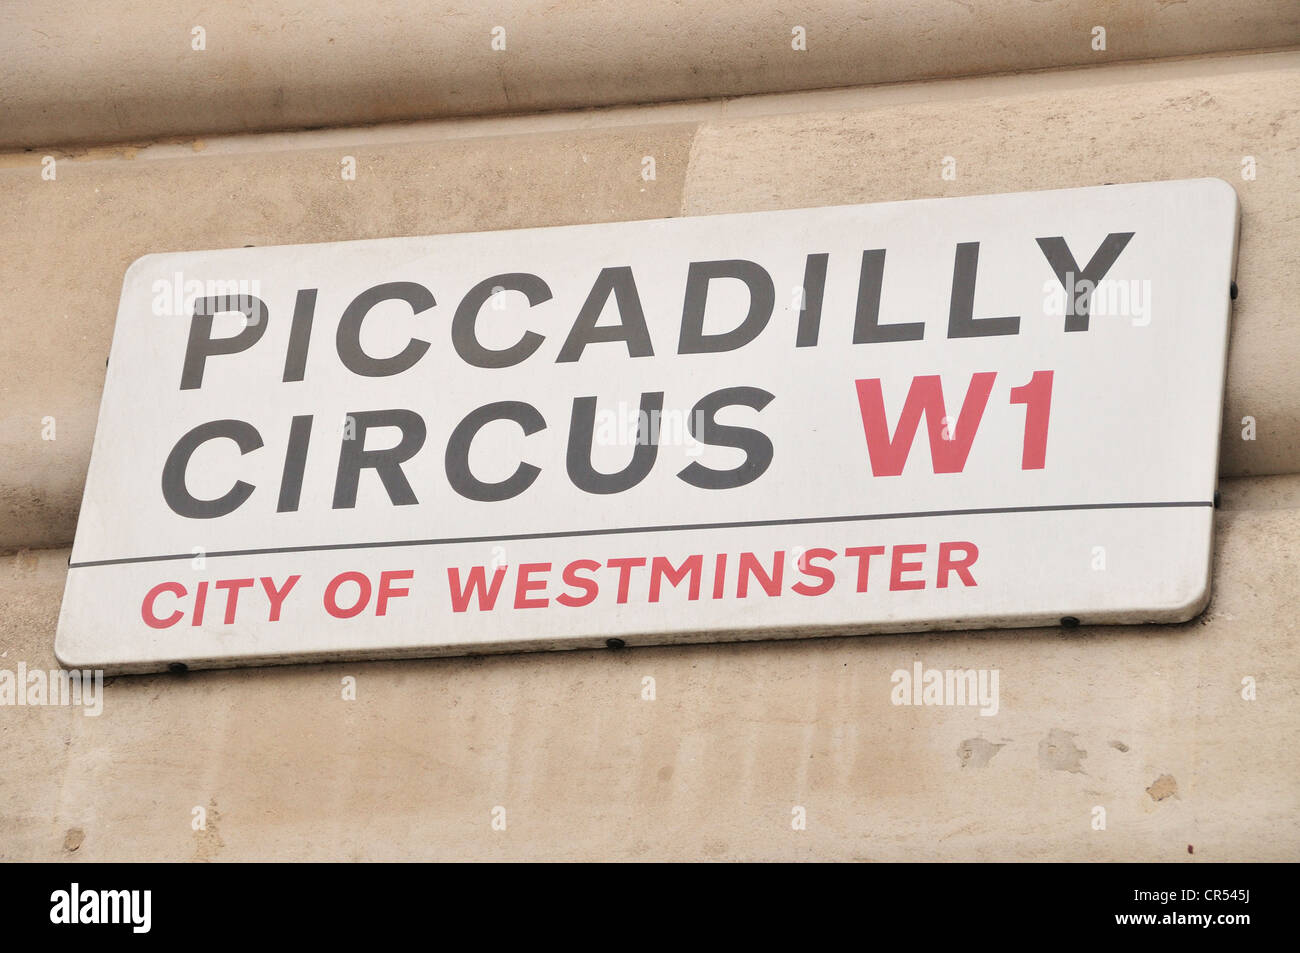 Street sign, Piccadilly Circus, London, England, Great Britain, United Kingdom, Europe Stock Photo